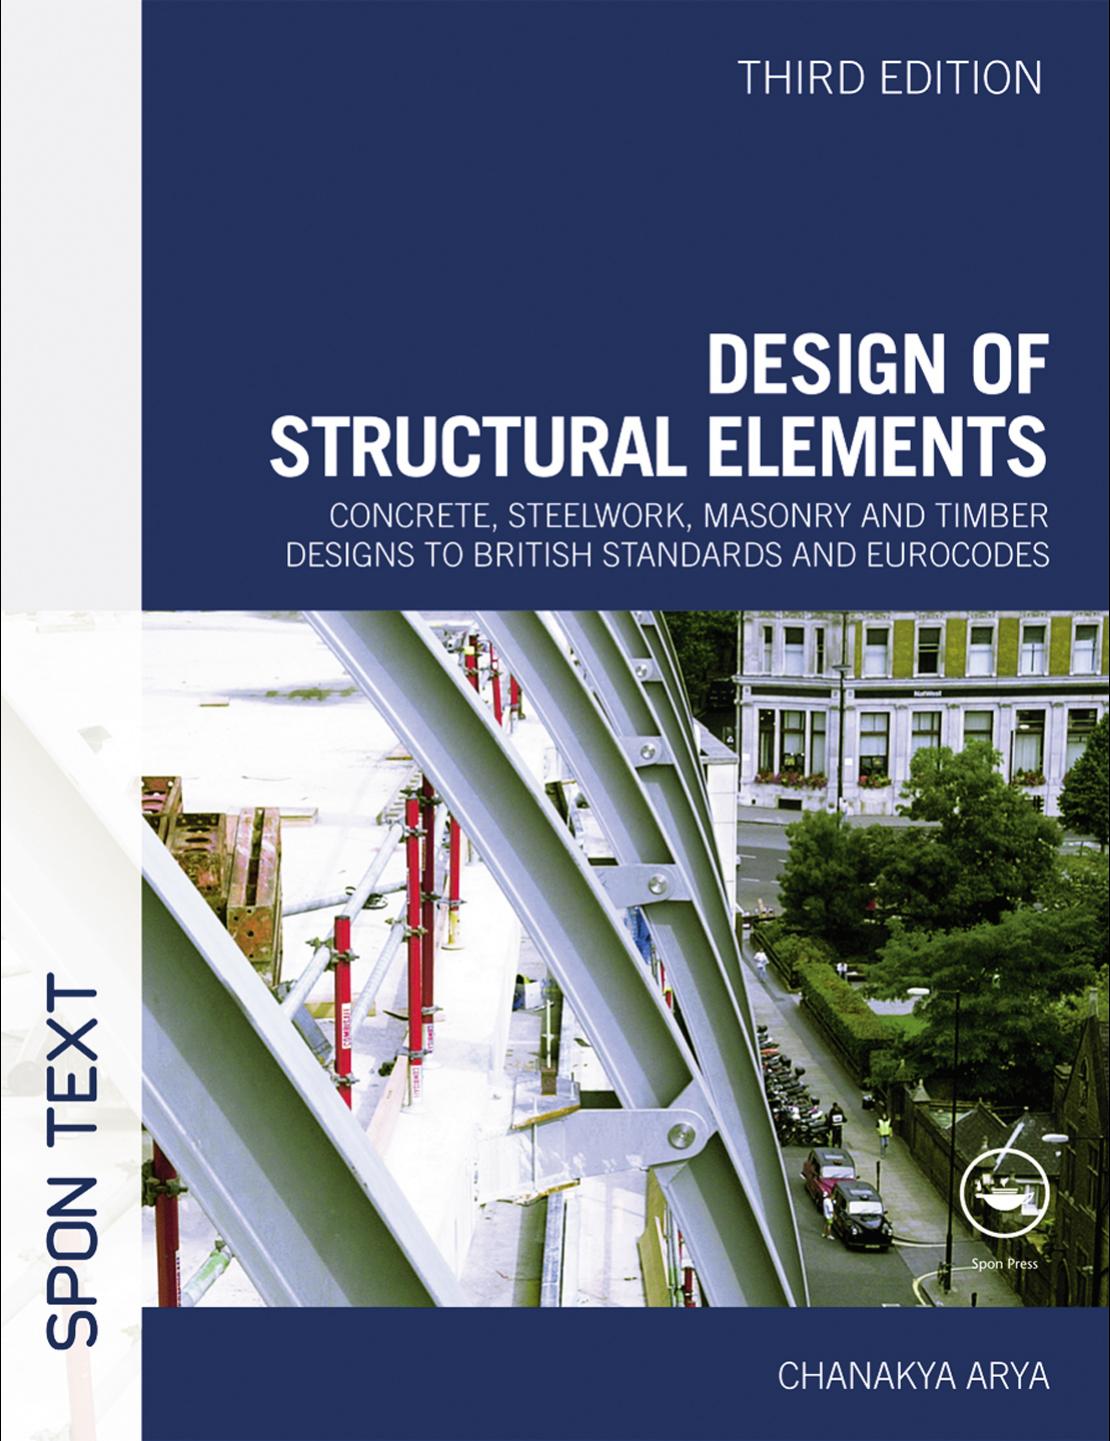 Design of Structural Elements: Concrete, steelwork, masonry and timber designs to British Standards and Eurocodes, Third Edition